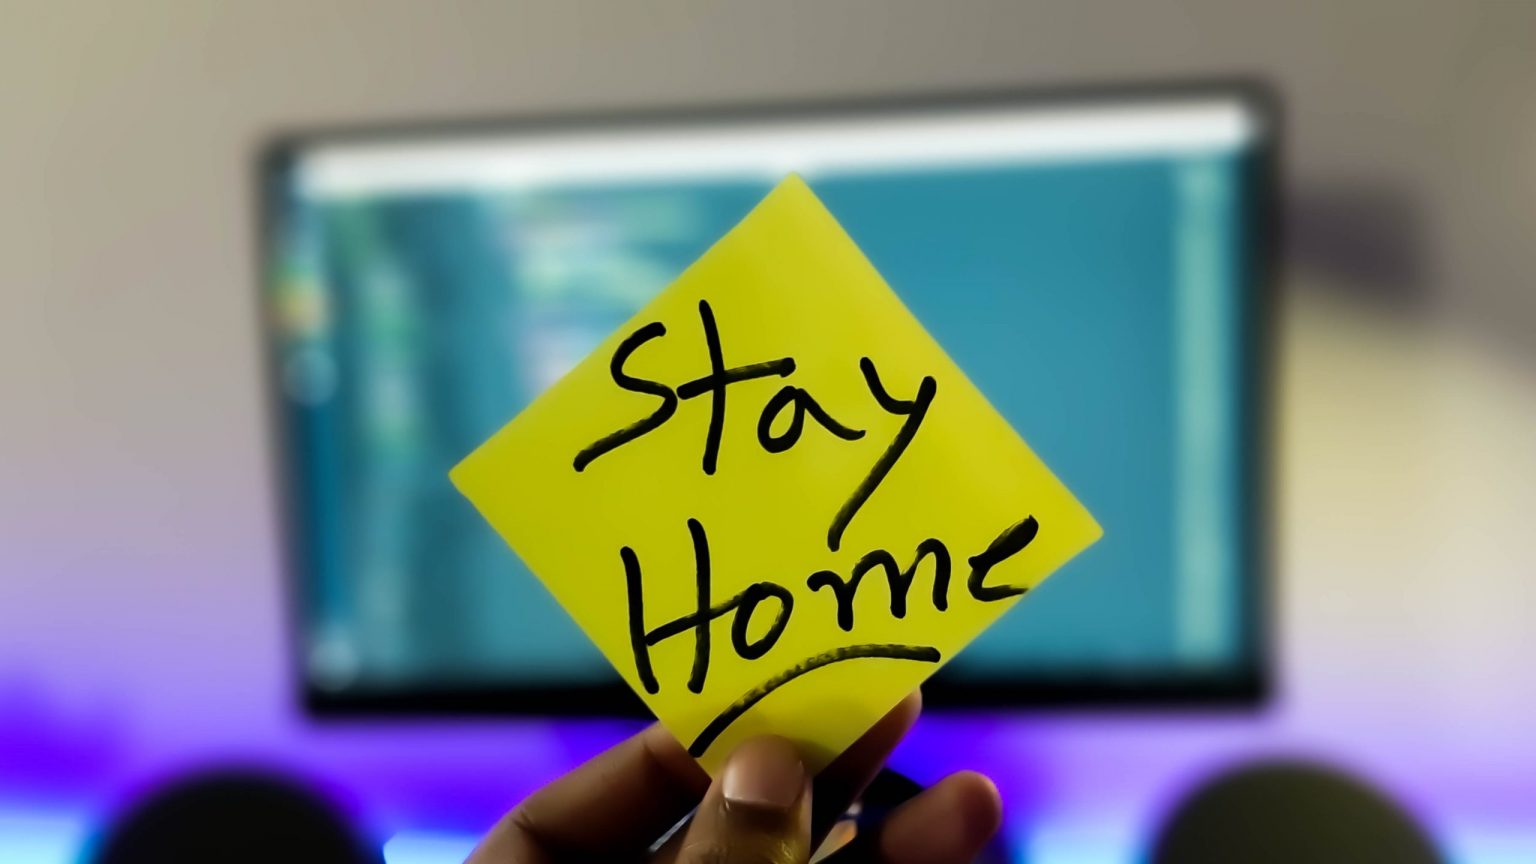 Everyone Should Stay Home (Covid19)